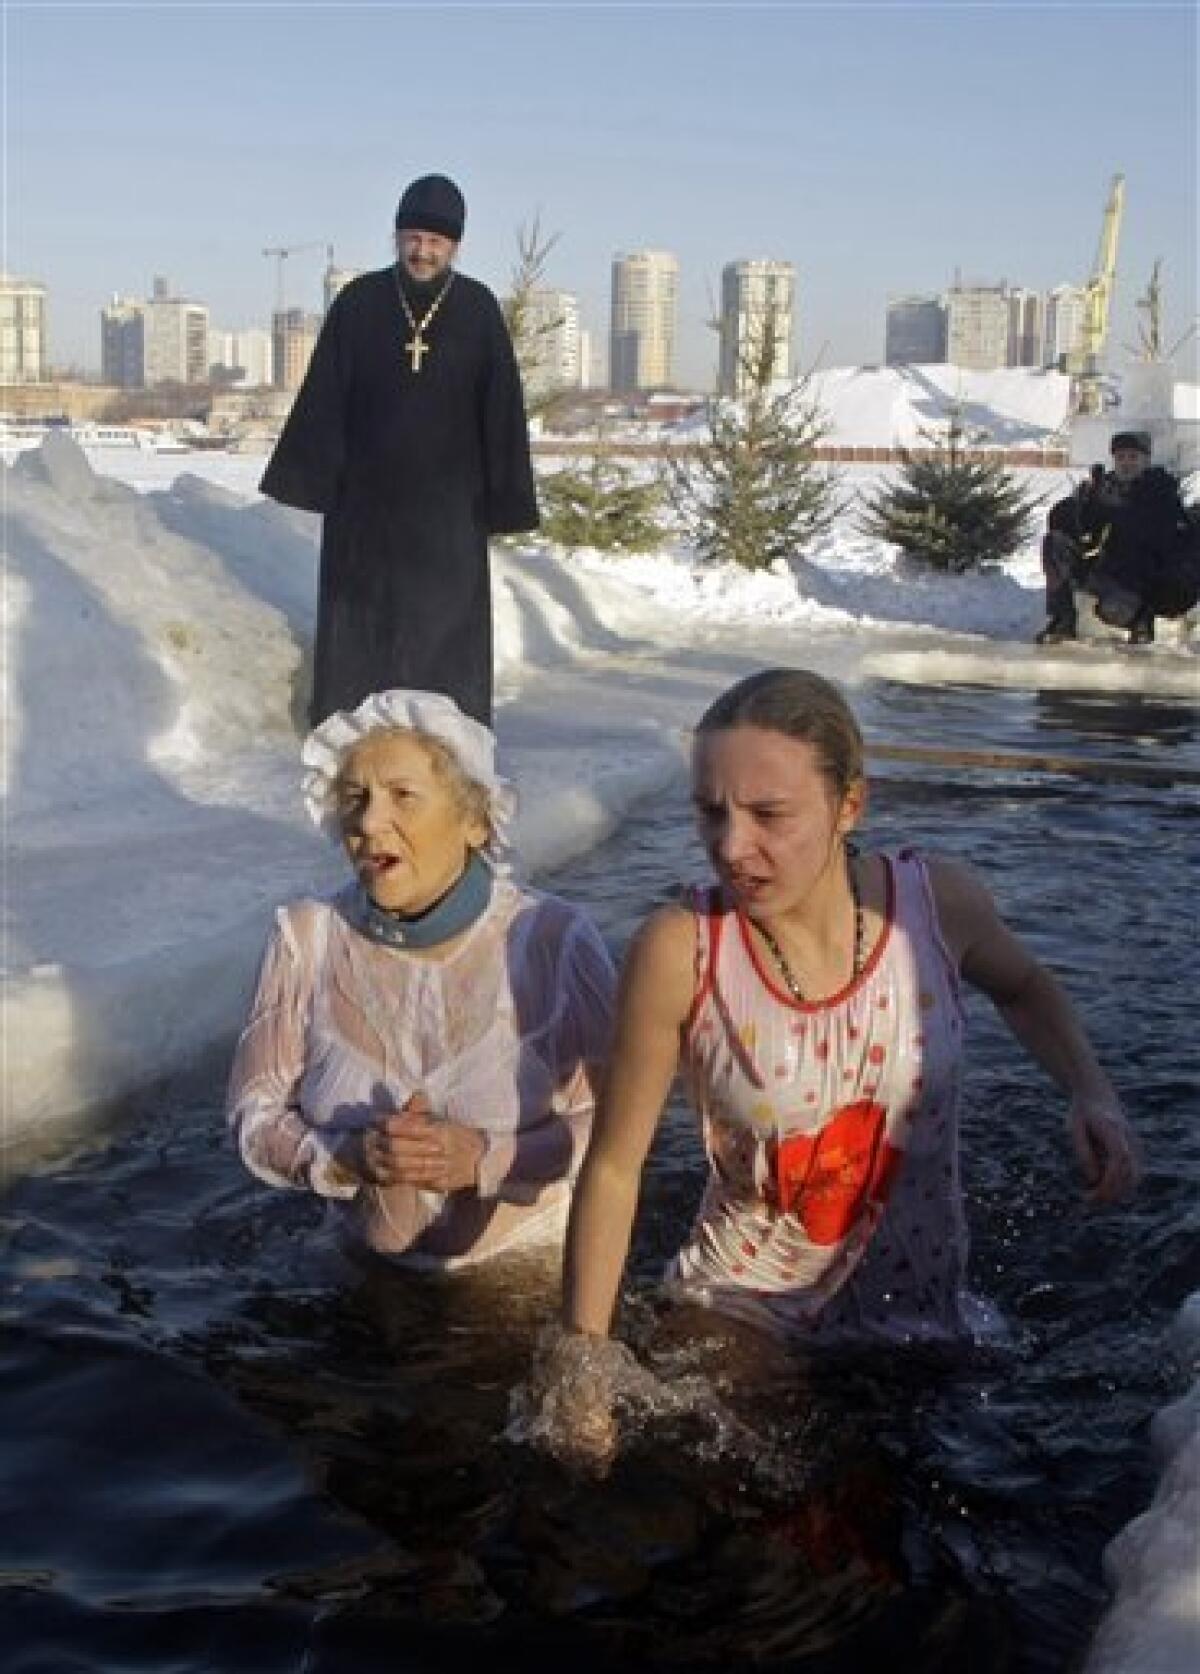 An elderly woman and girl wade into an icy pond to mark the upcoming Epiphany in the northwestern Moscow, Monday, Jan. 18, 2010. Thousands of Russian Orthodox Church followers plunged Monday into icy rivers and ponds across the country to mark the upcoming Epiphany, cleansing themselves with water deemed holy for the day. Water that is blessed by a cleric on Epiphany is considered holy and pure until next year's celebration, and is believed to have special powers of protection and healing. The Russian Orthodox Church follows the old Julian calendar, according to which Epiphany falls on Jan. 19. Moscow temperatures on Monday morning dropped to -20 C (-4 F). (AP Photo/Mikhail Metzel) — AP